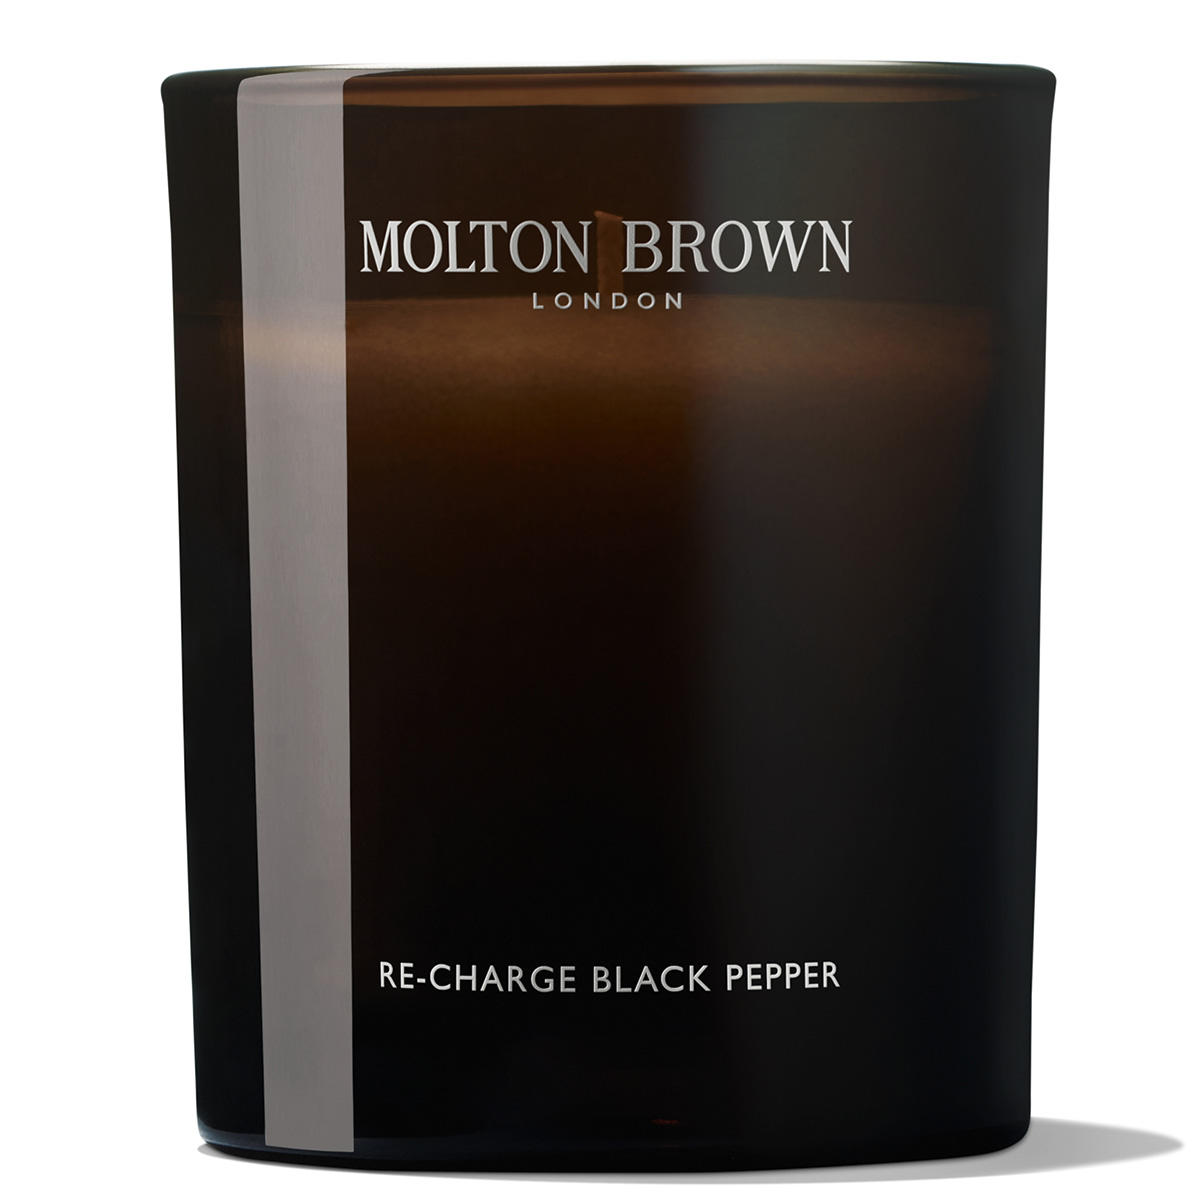 MOLTON BROWN Re-charge Black Pepper Scented Candle 190 g - 2